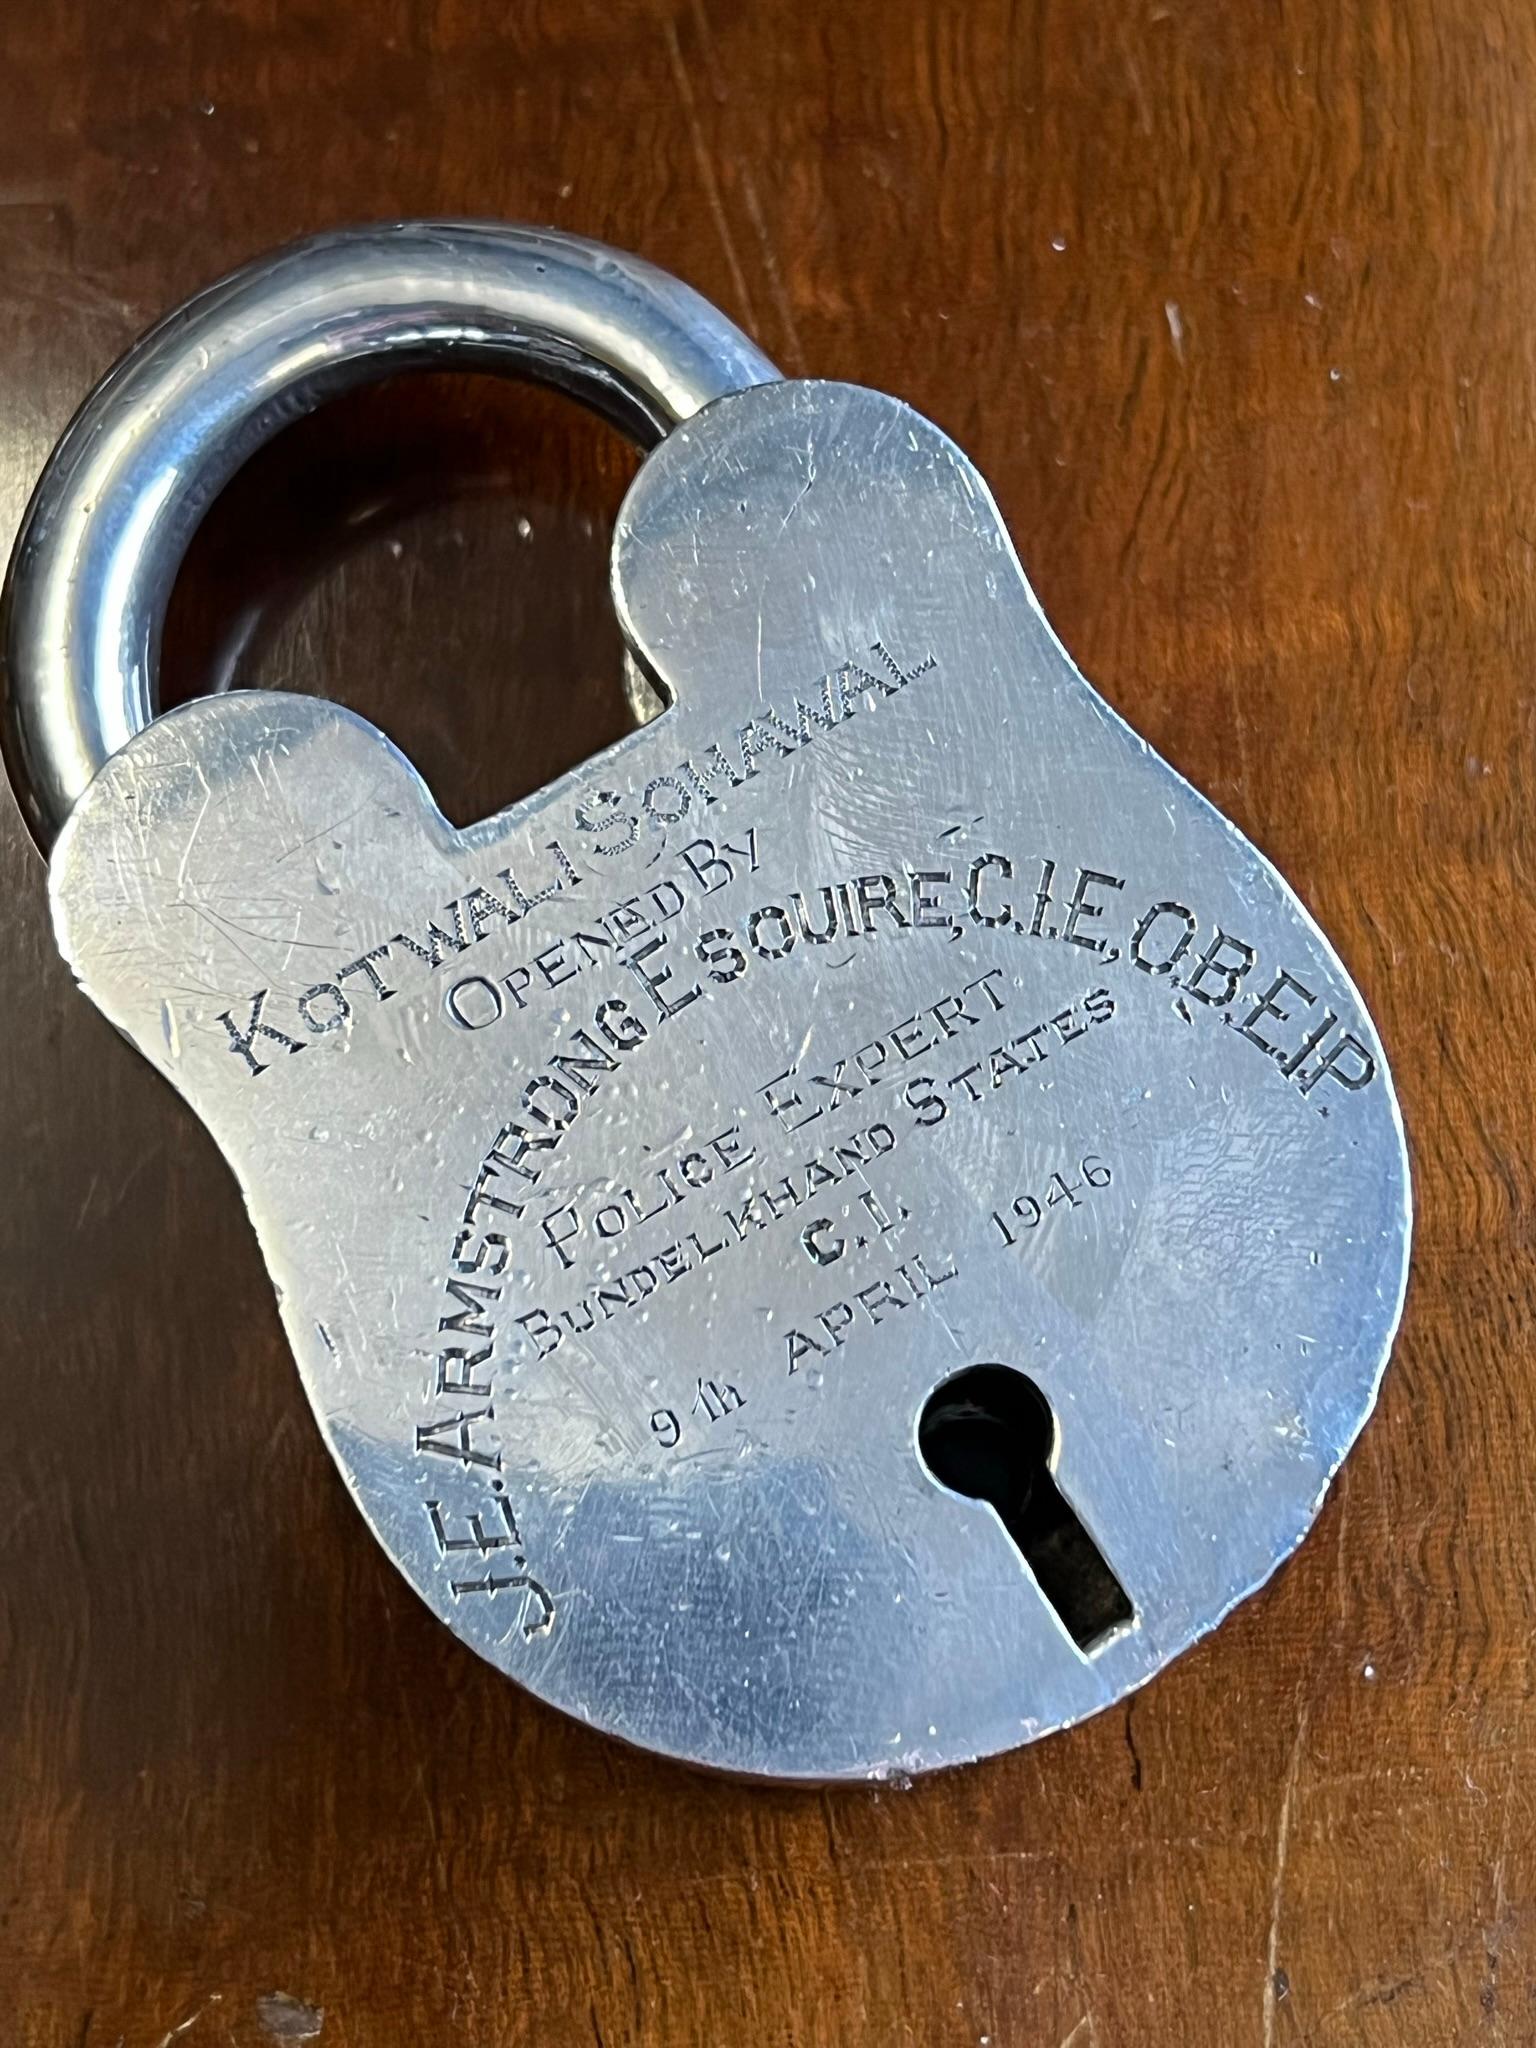 We are delighted to offer for sale this absolutely exquisite, finest example, late Victorian silver plated Chubb’s padlock the was gifted to a police expert in 1946

I have never seen a silver plated version of this type of Chubb’s lock before, it